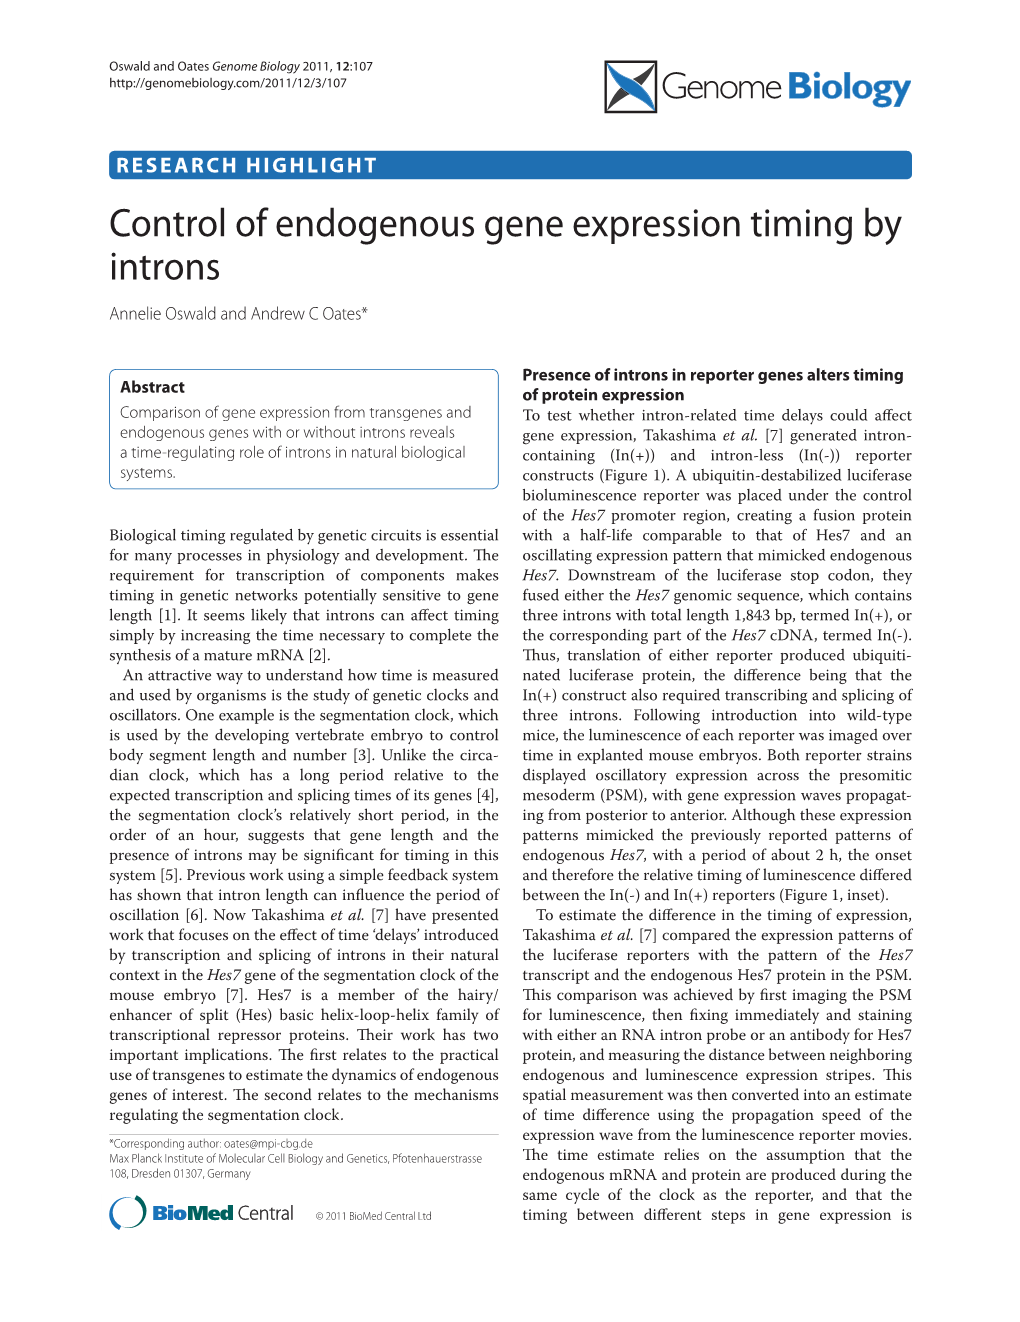 Control of Endogenous Gene Expression Timing by Introns Annelie Oswald and Andrew C Oates*